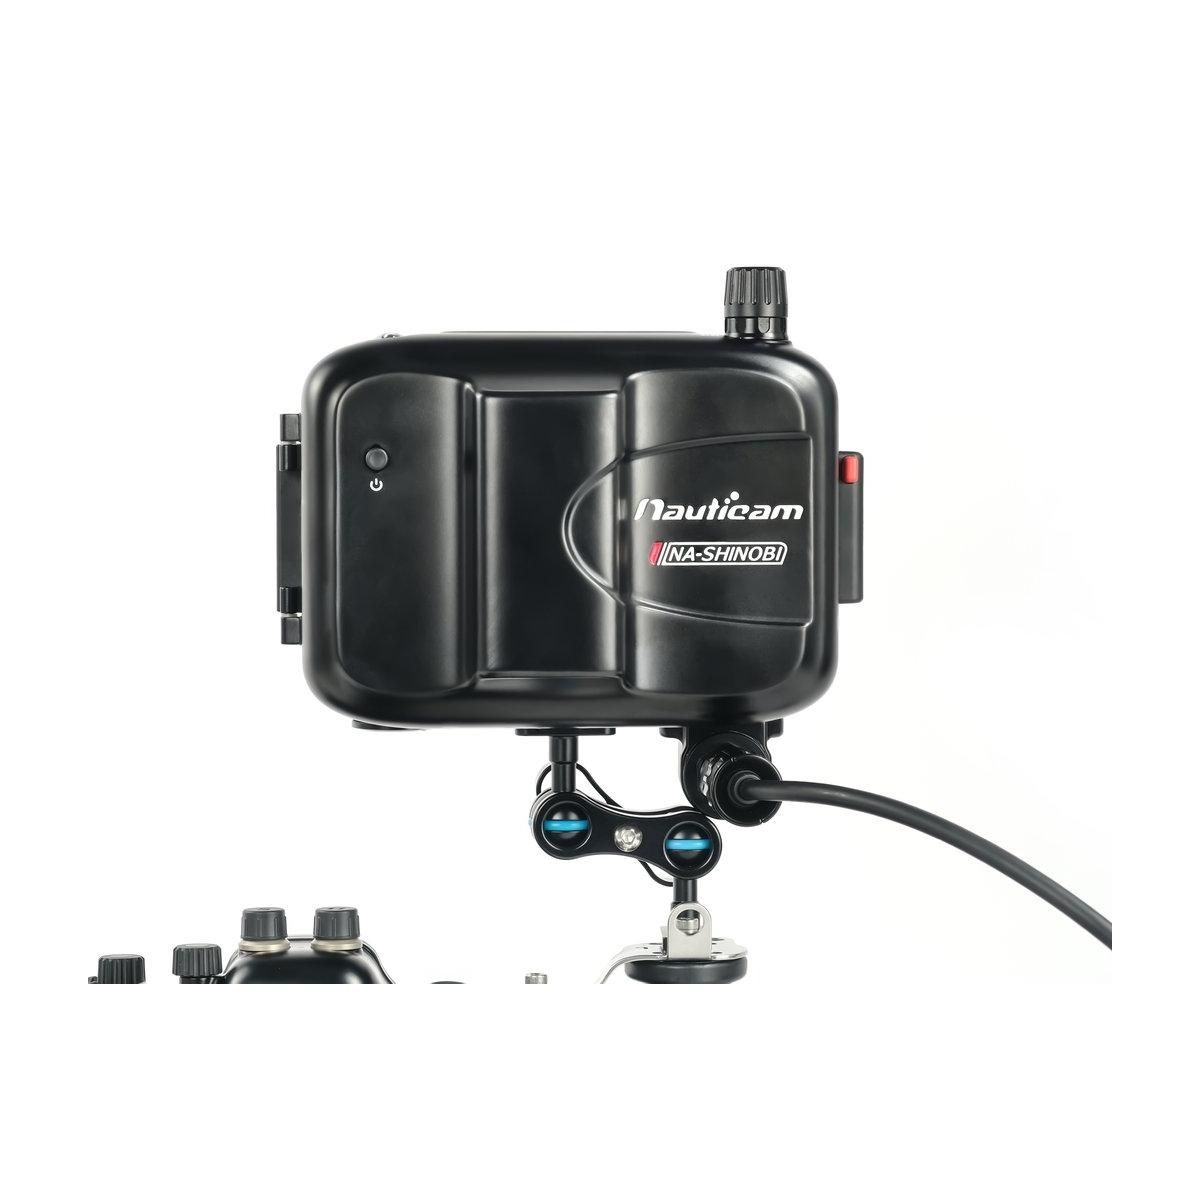 NA-H5D housing for Hasselblad H5D system